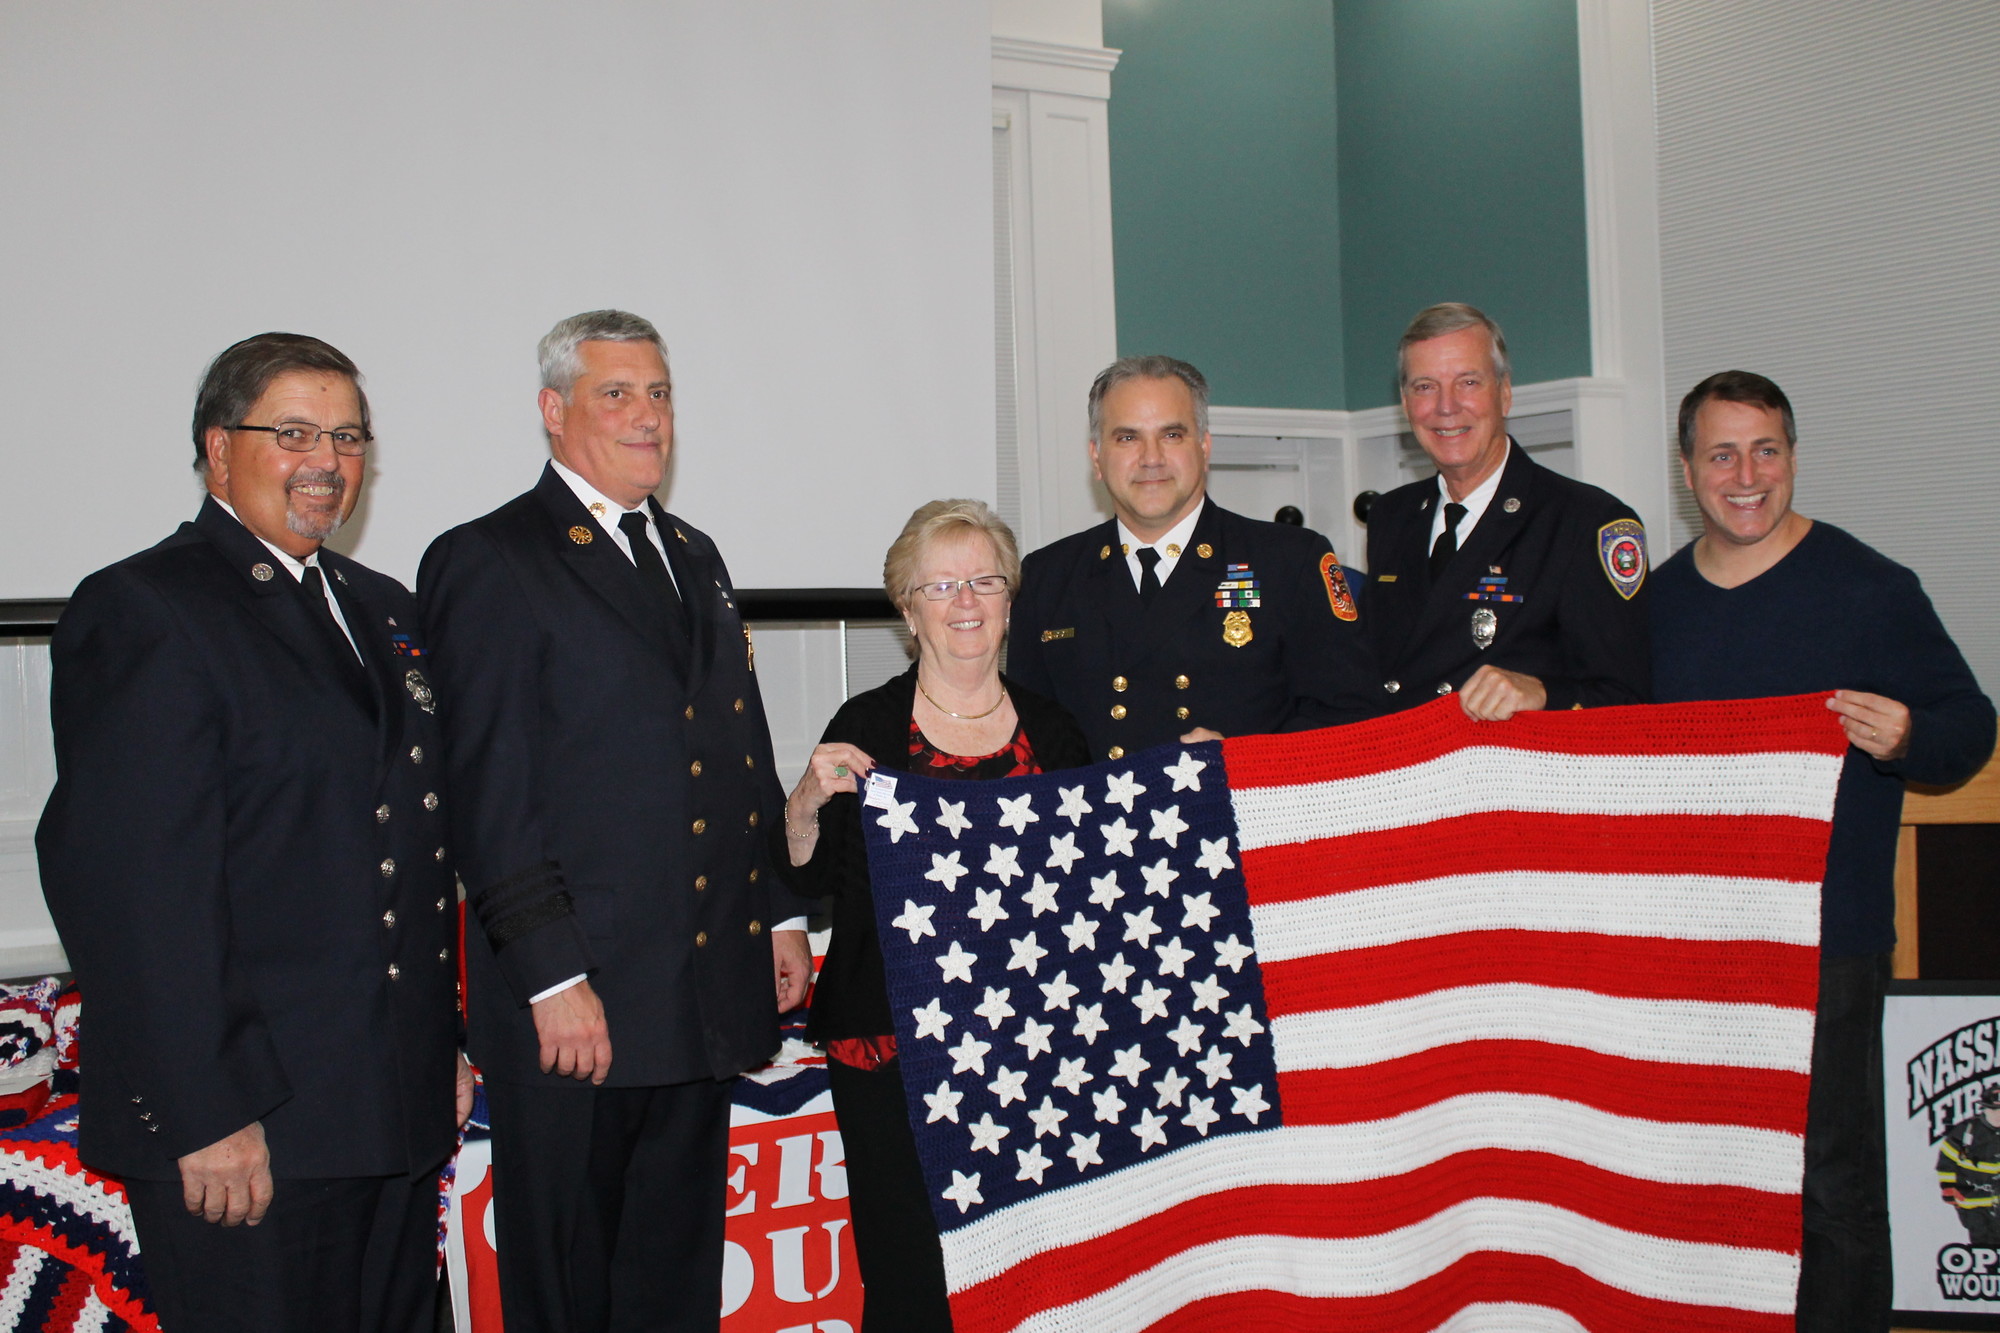 Lynbrook resident Barbara Barnhart, president and founder of Loops of Love, held one of the American flag blankets sewn by one of its members. Joining her were, from left:  Richard Straub, Lynbrook Fire Department; Bill Graham, Garden City Fire Department; Joe O'Grady, Floral Park Fire Departmentand Chairman of NCFF-OWW; Steve Grogan, Lynbrook Fire Department, and Assemblyman Brian Curran.